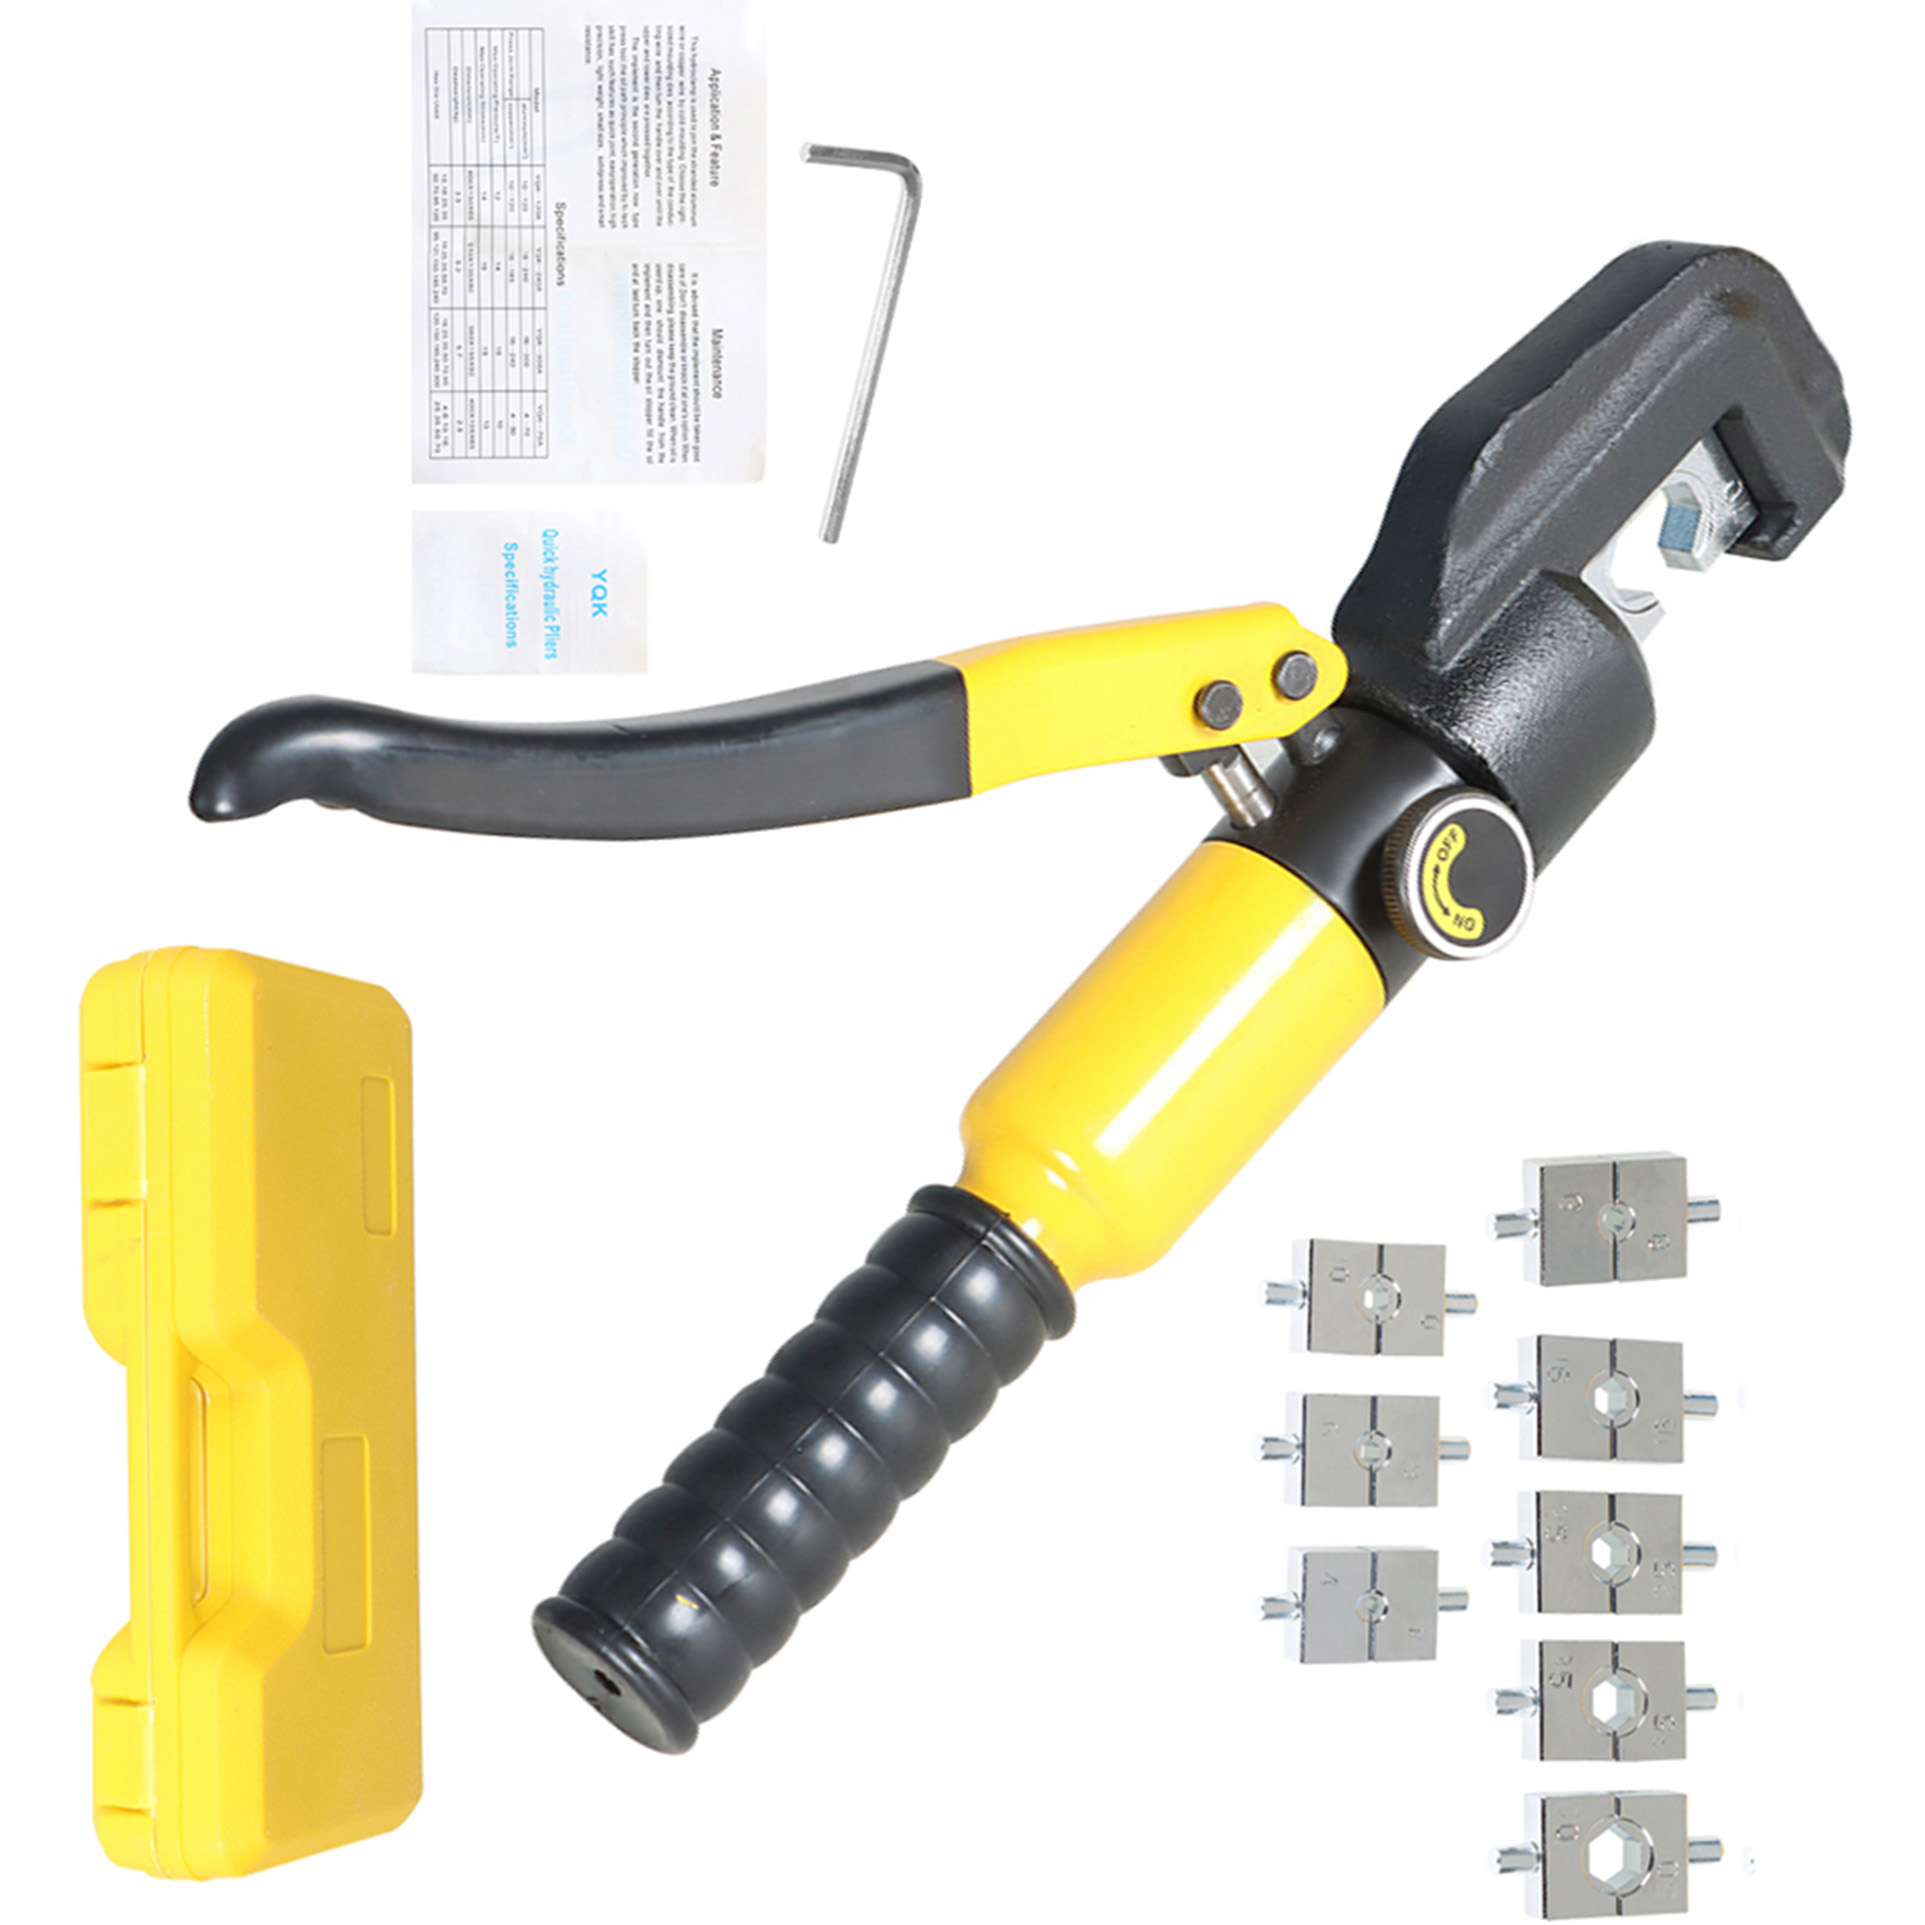 Handdo 5 Ton Hydraulic Lug Crimper Wire Lug Terminal Cable Crimping Tool with 9 Pairs of Dies - image 1 of 1